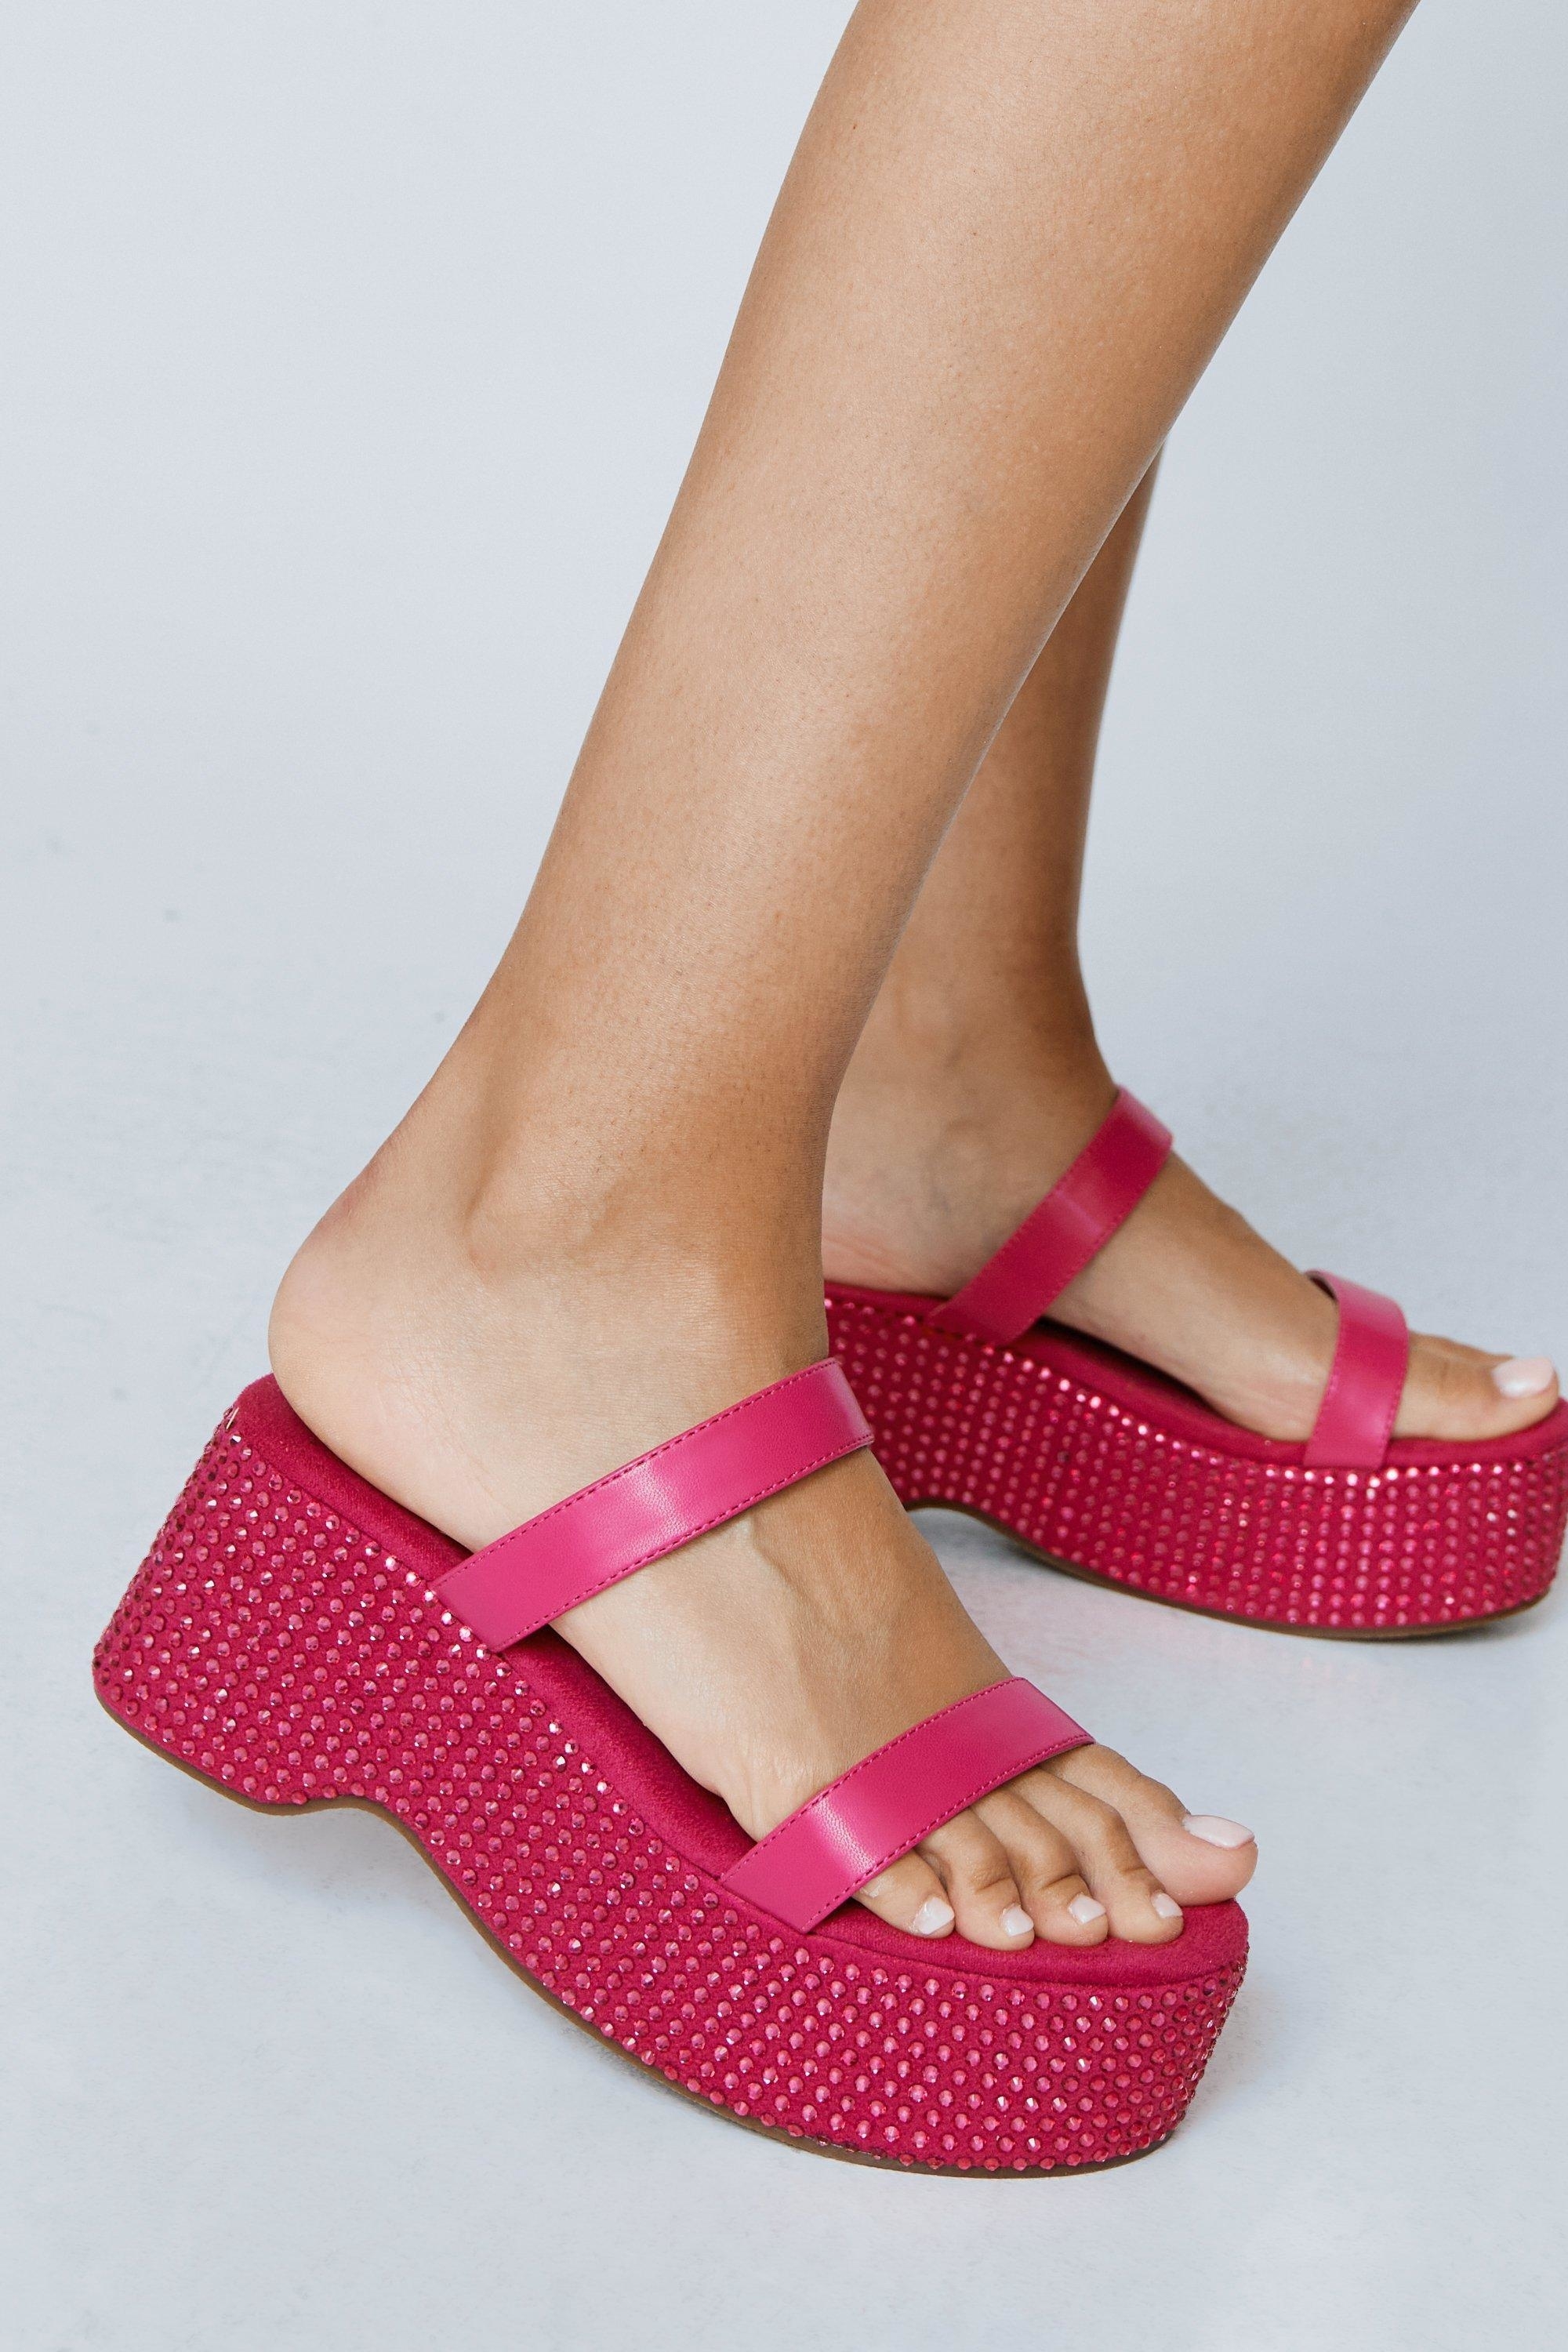 Close-up of a person wearing pink platform sandals with embellished details